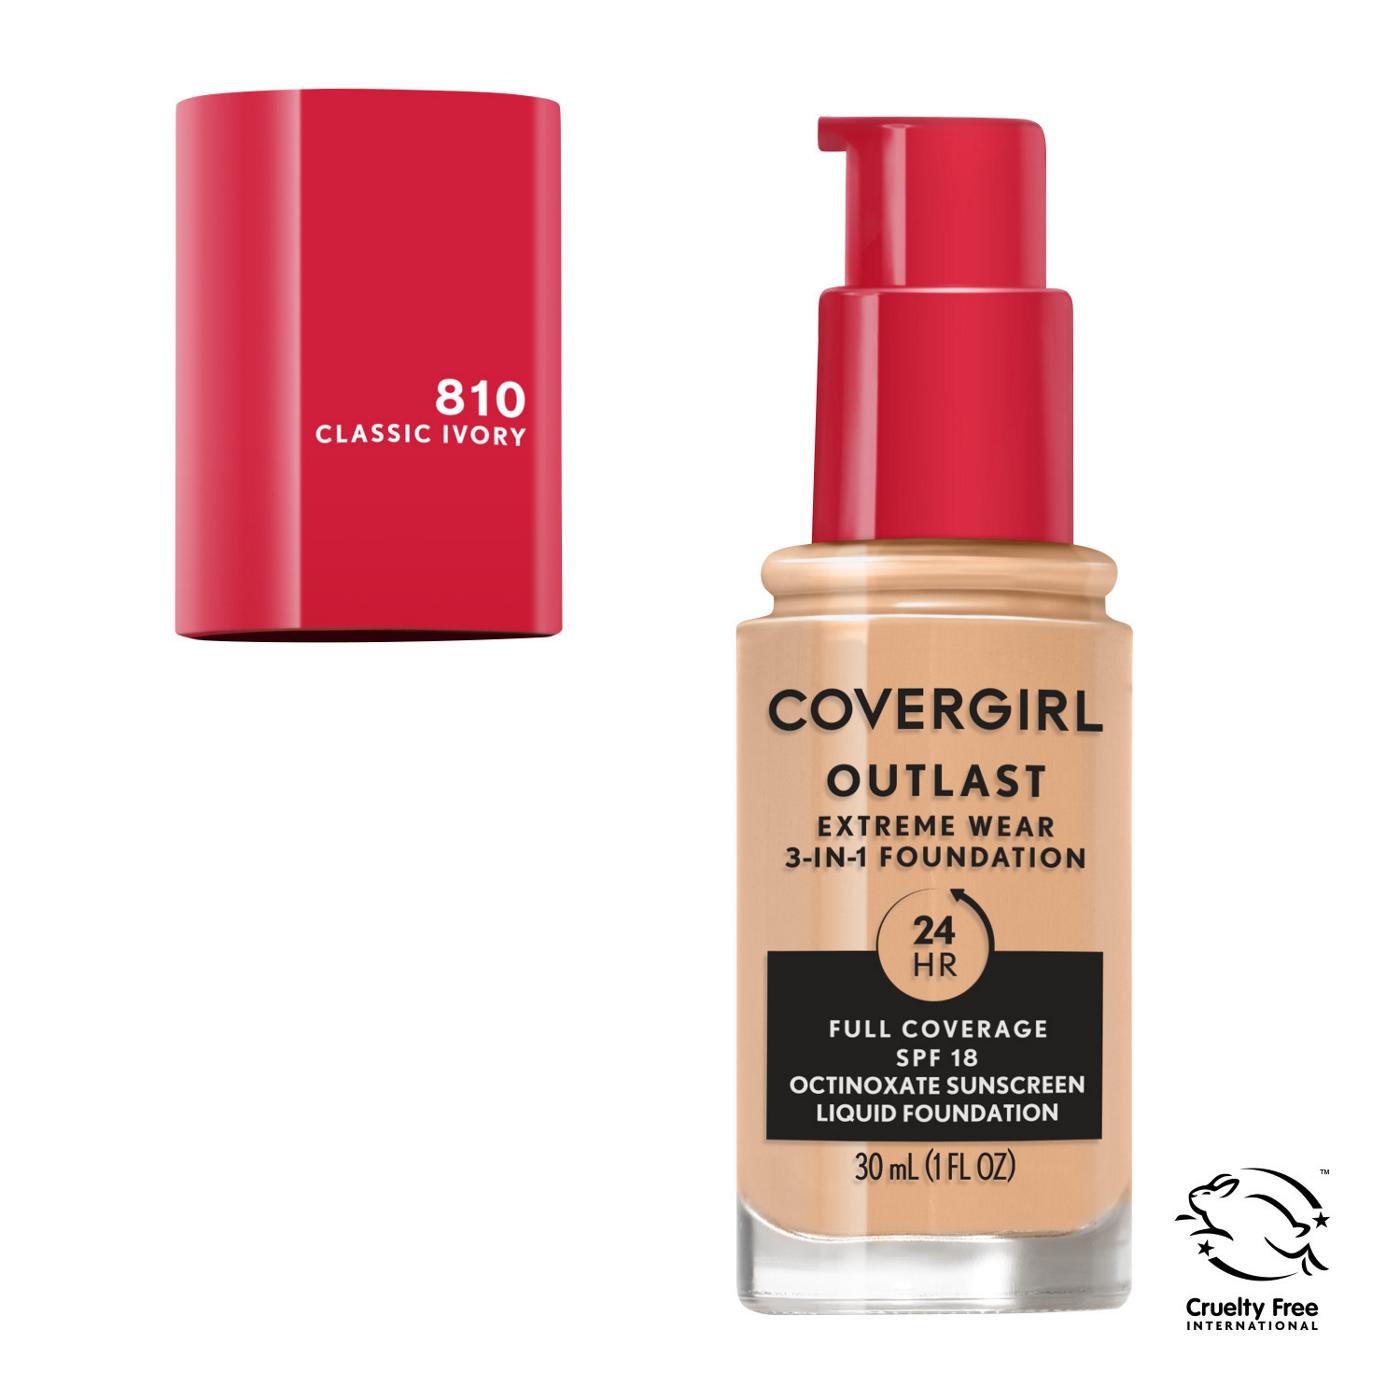 Covergirl Outlast Extreme Wear Liquid Foundation 810 Classic Ivory; image 10 of 11